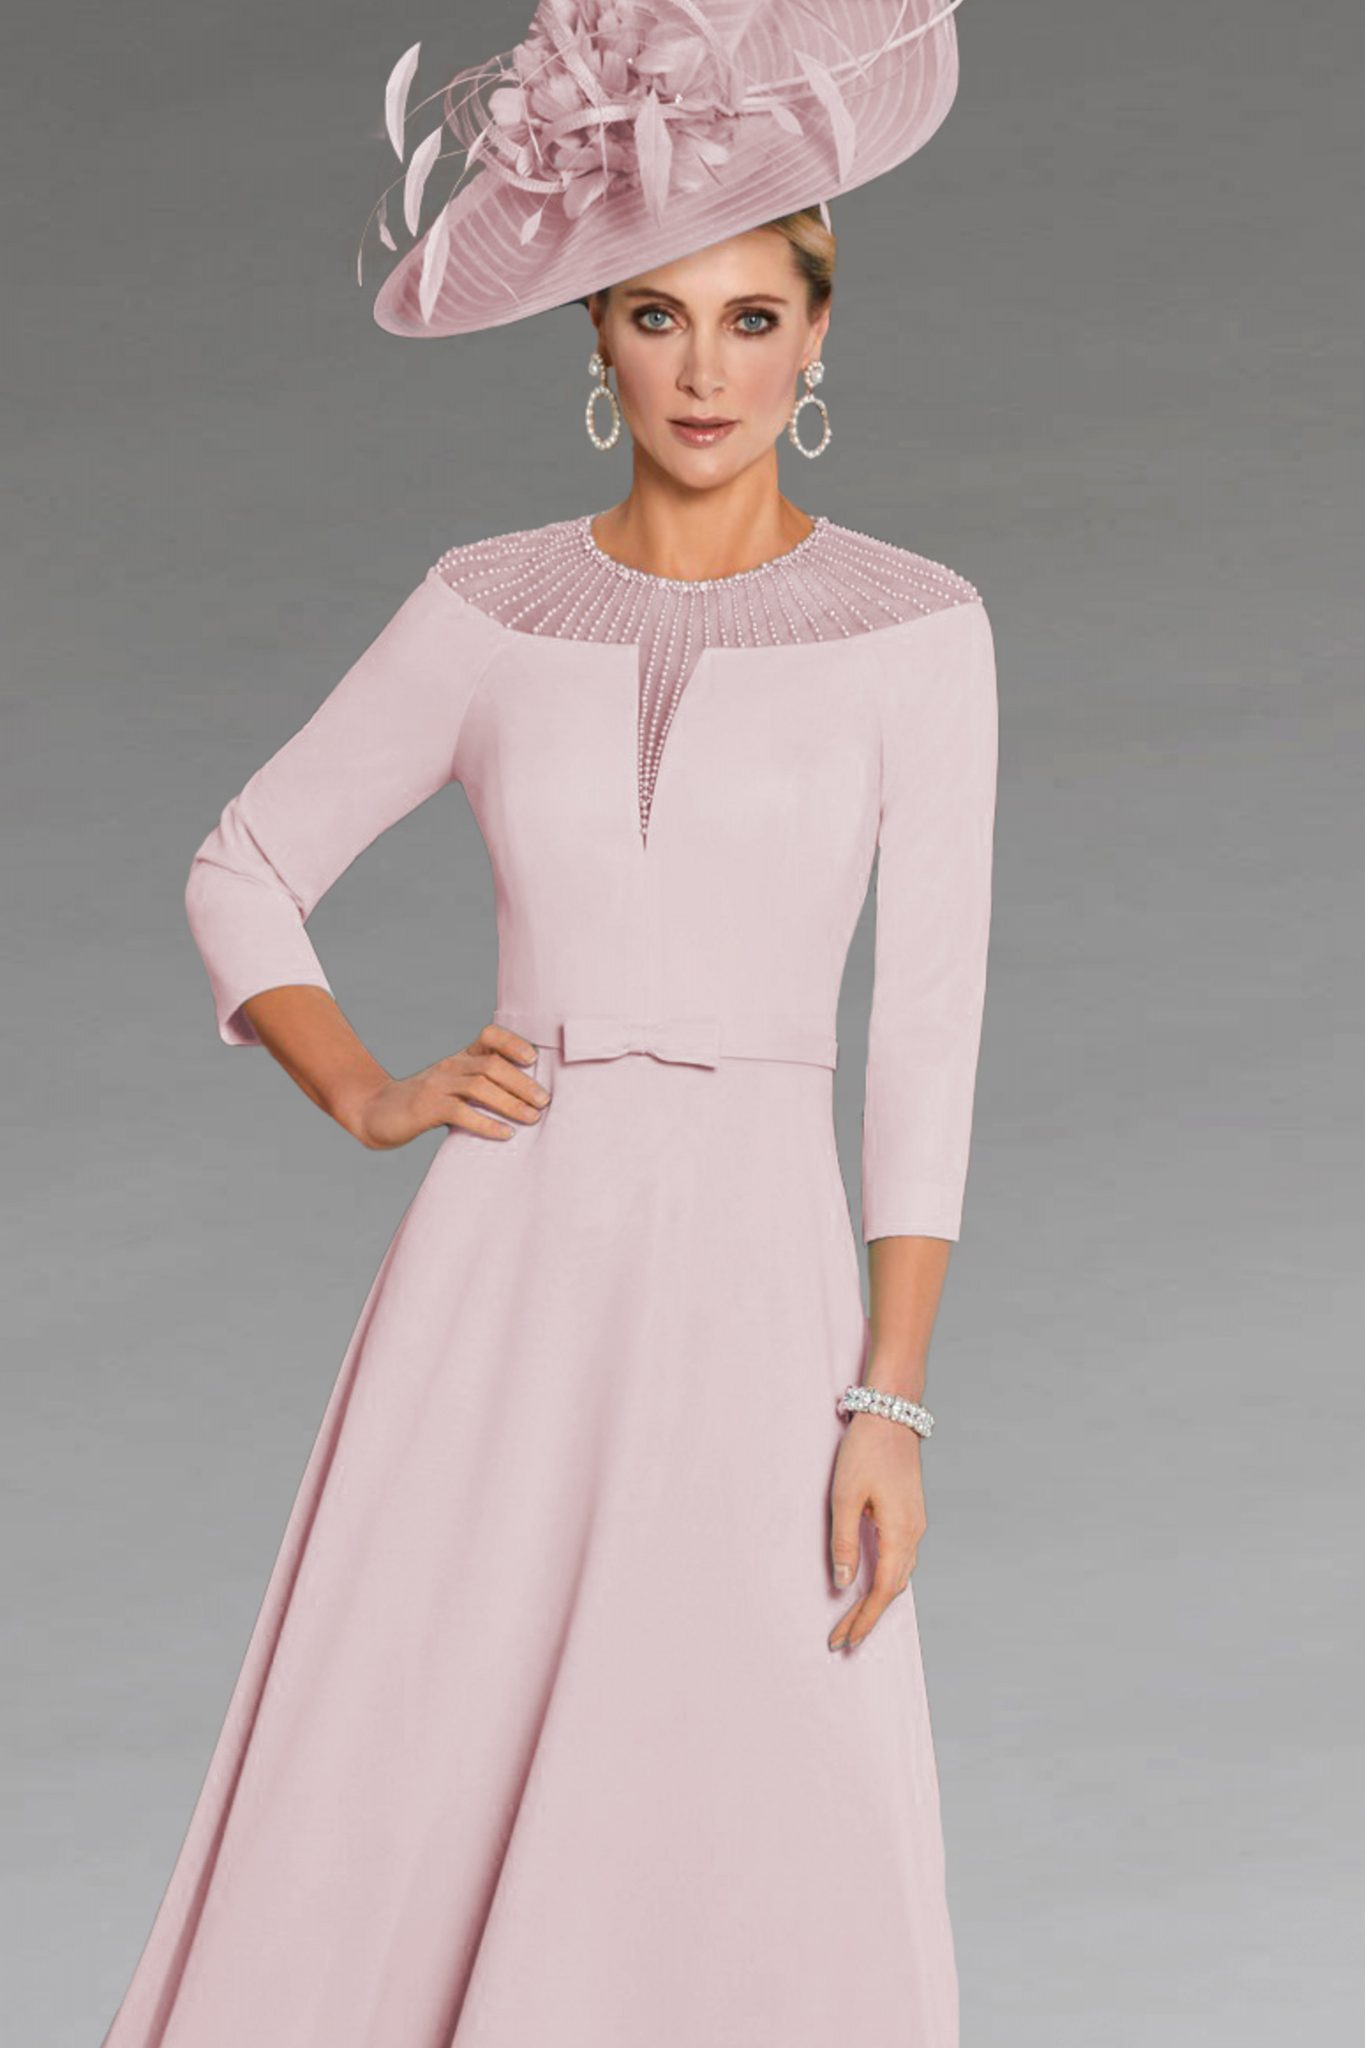 Mid Length Dress With Chiffon Skirt. 70292B - Catherines of Partick